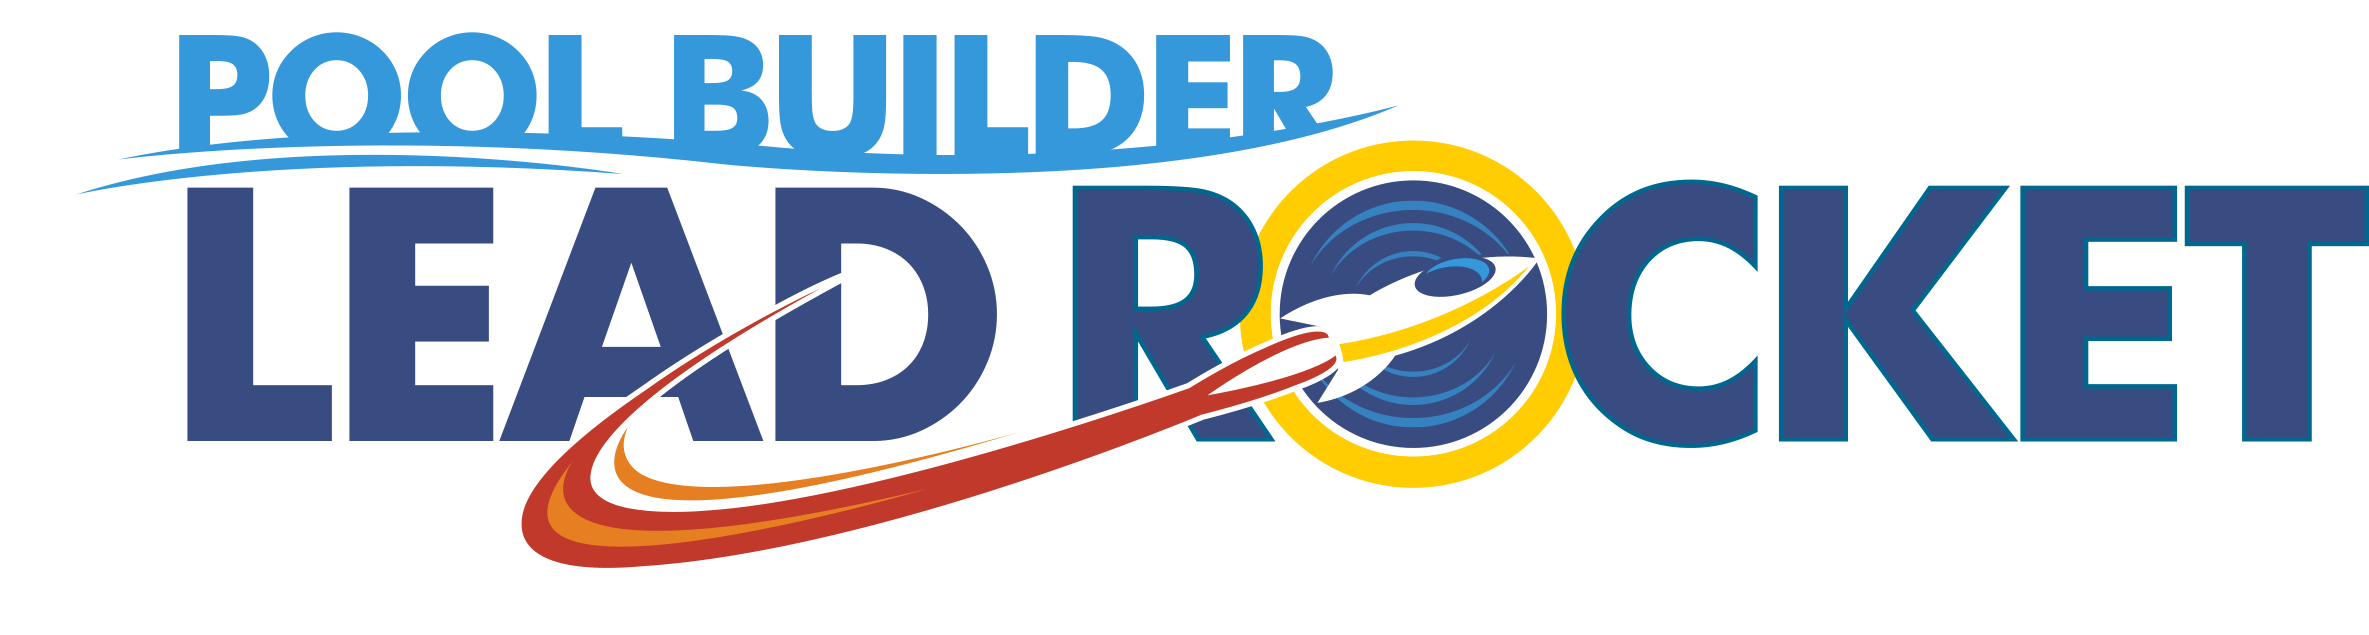 Pool Builder Marketing | Internet Marketing Solutions for the Pool Builder Industry